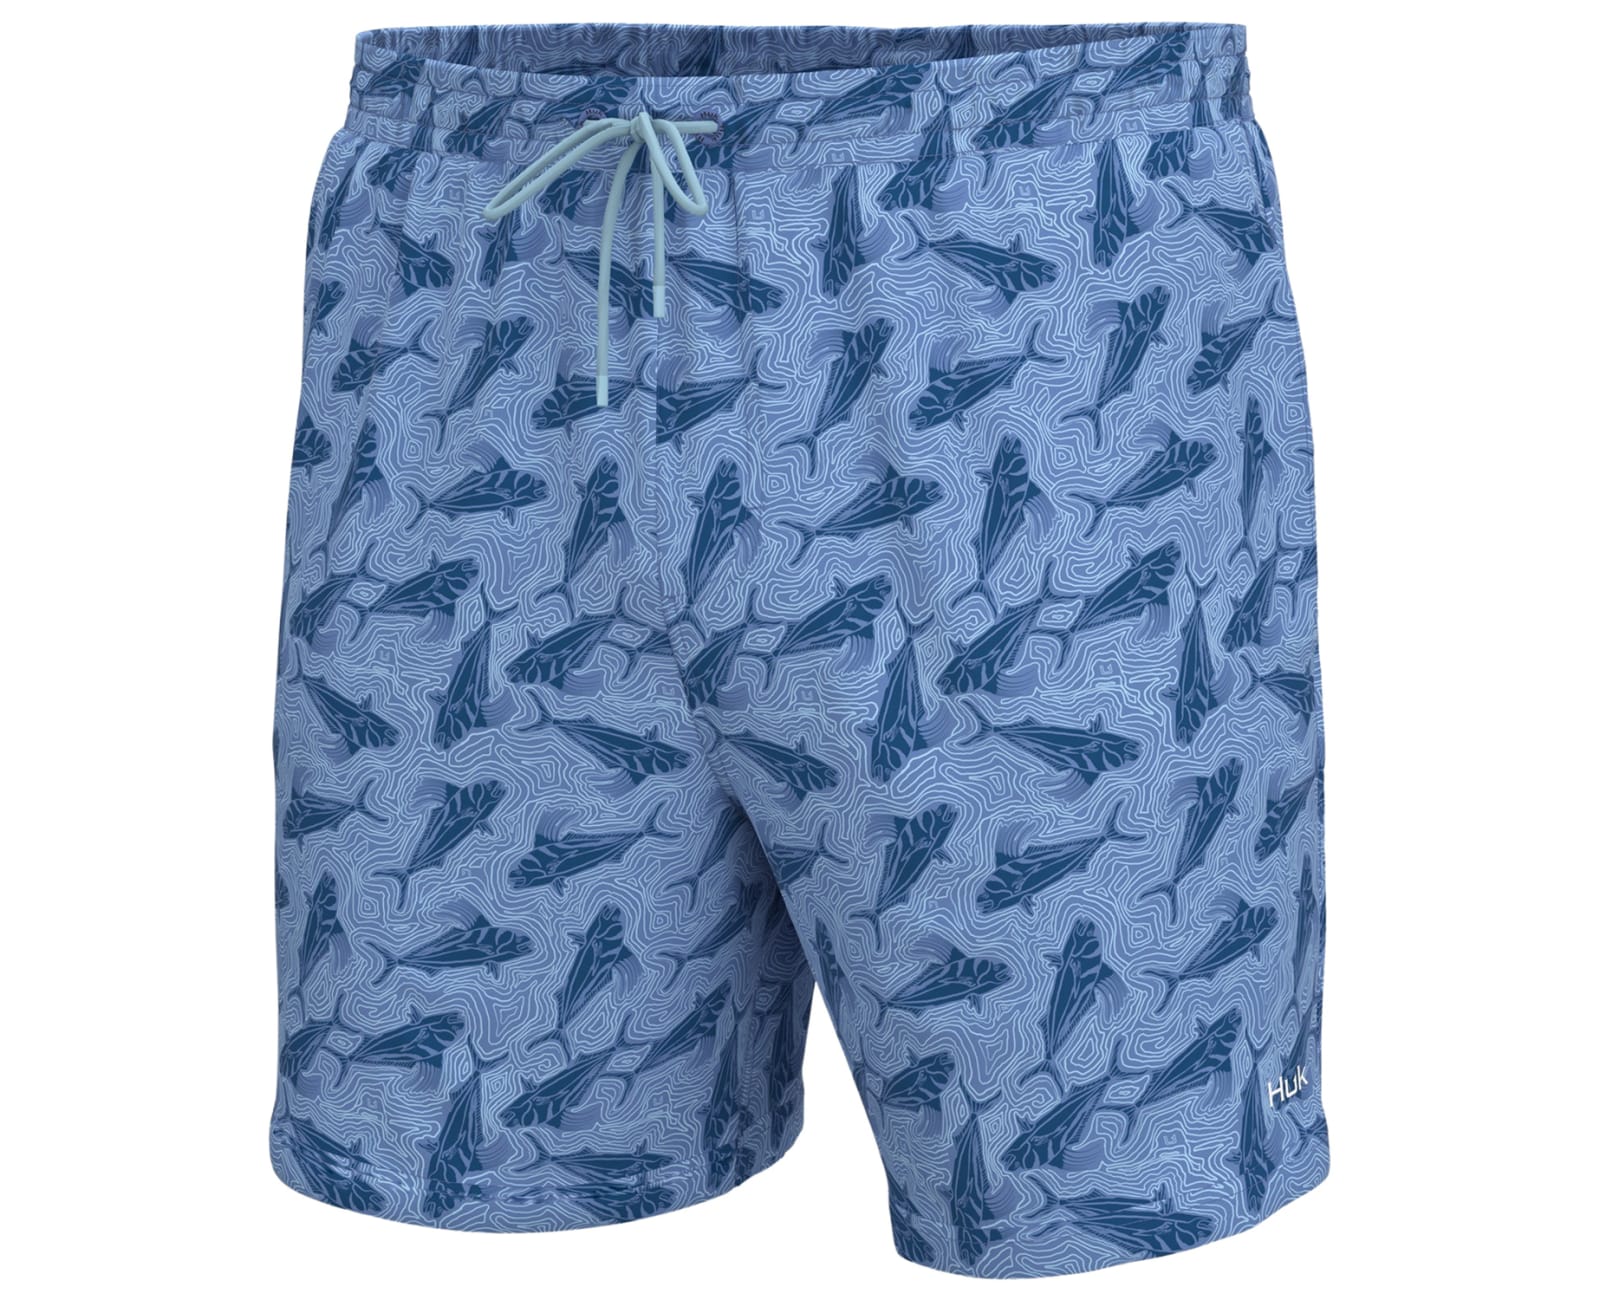 Huk Men's Pursuit Volley Rooster Wake - Wedgewood - XL